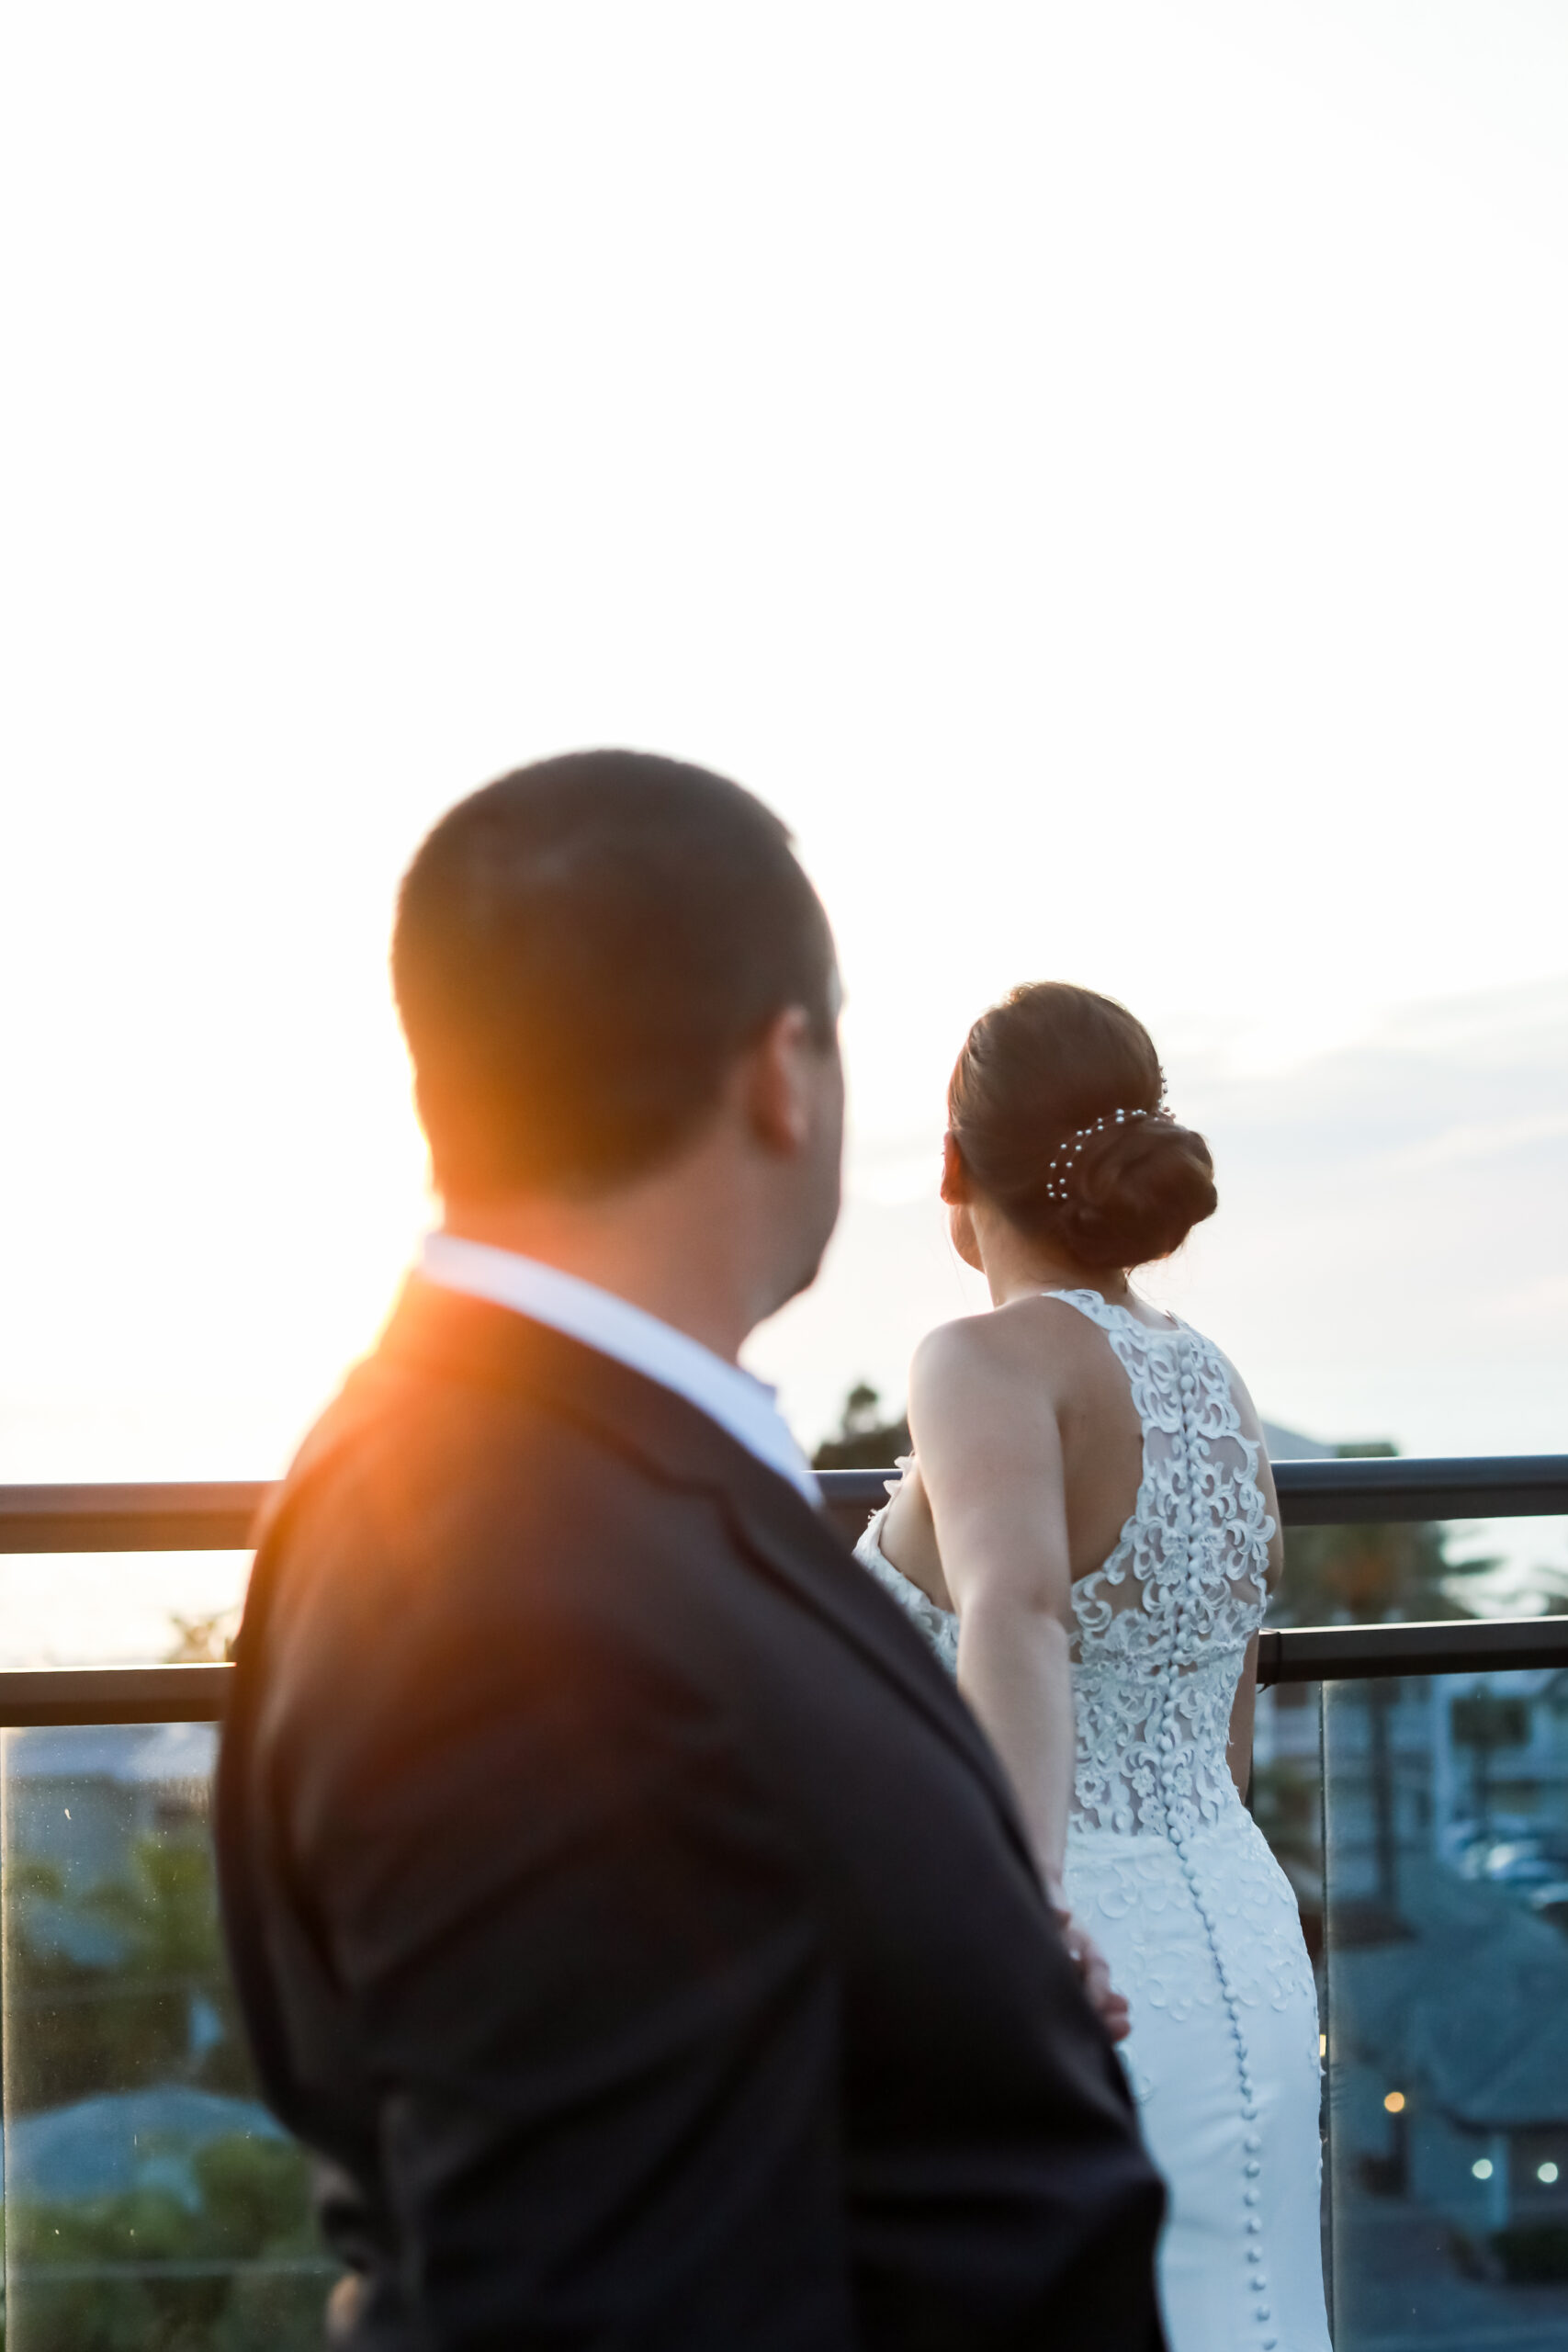 a bride in the background looking away from the camera and a groom in the foreground holding the bride's hand looking at her